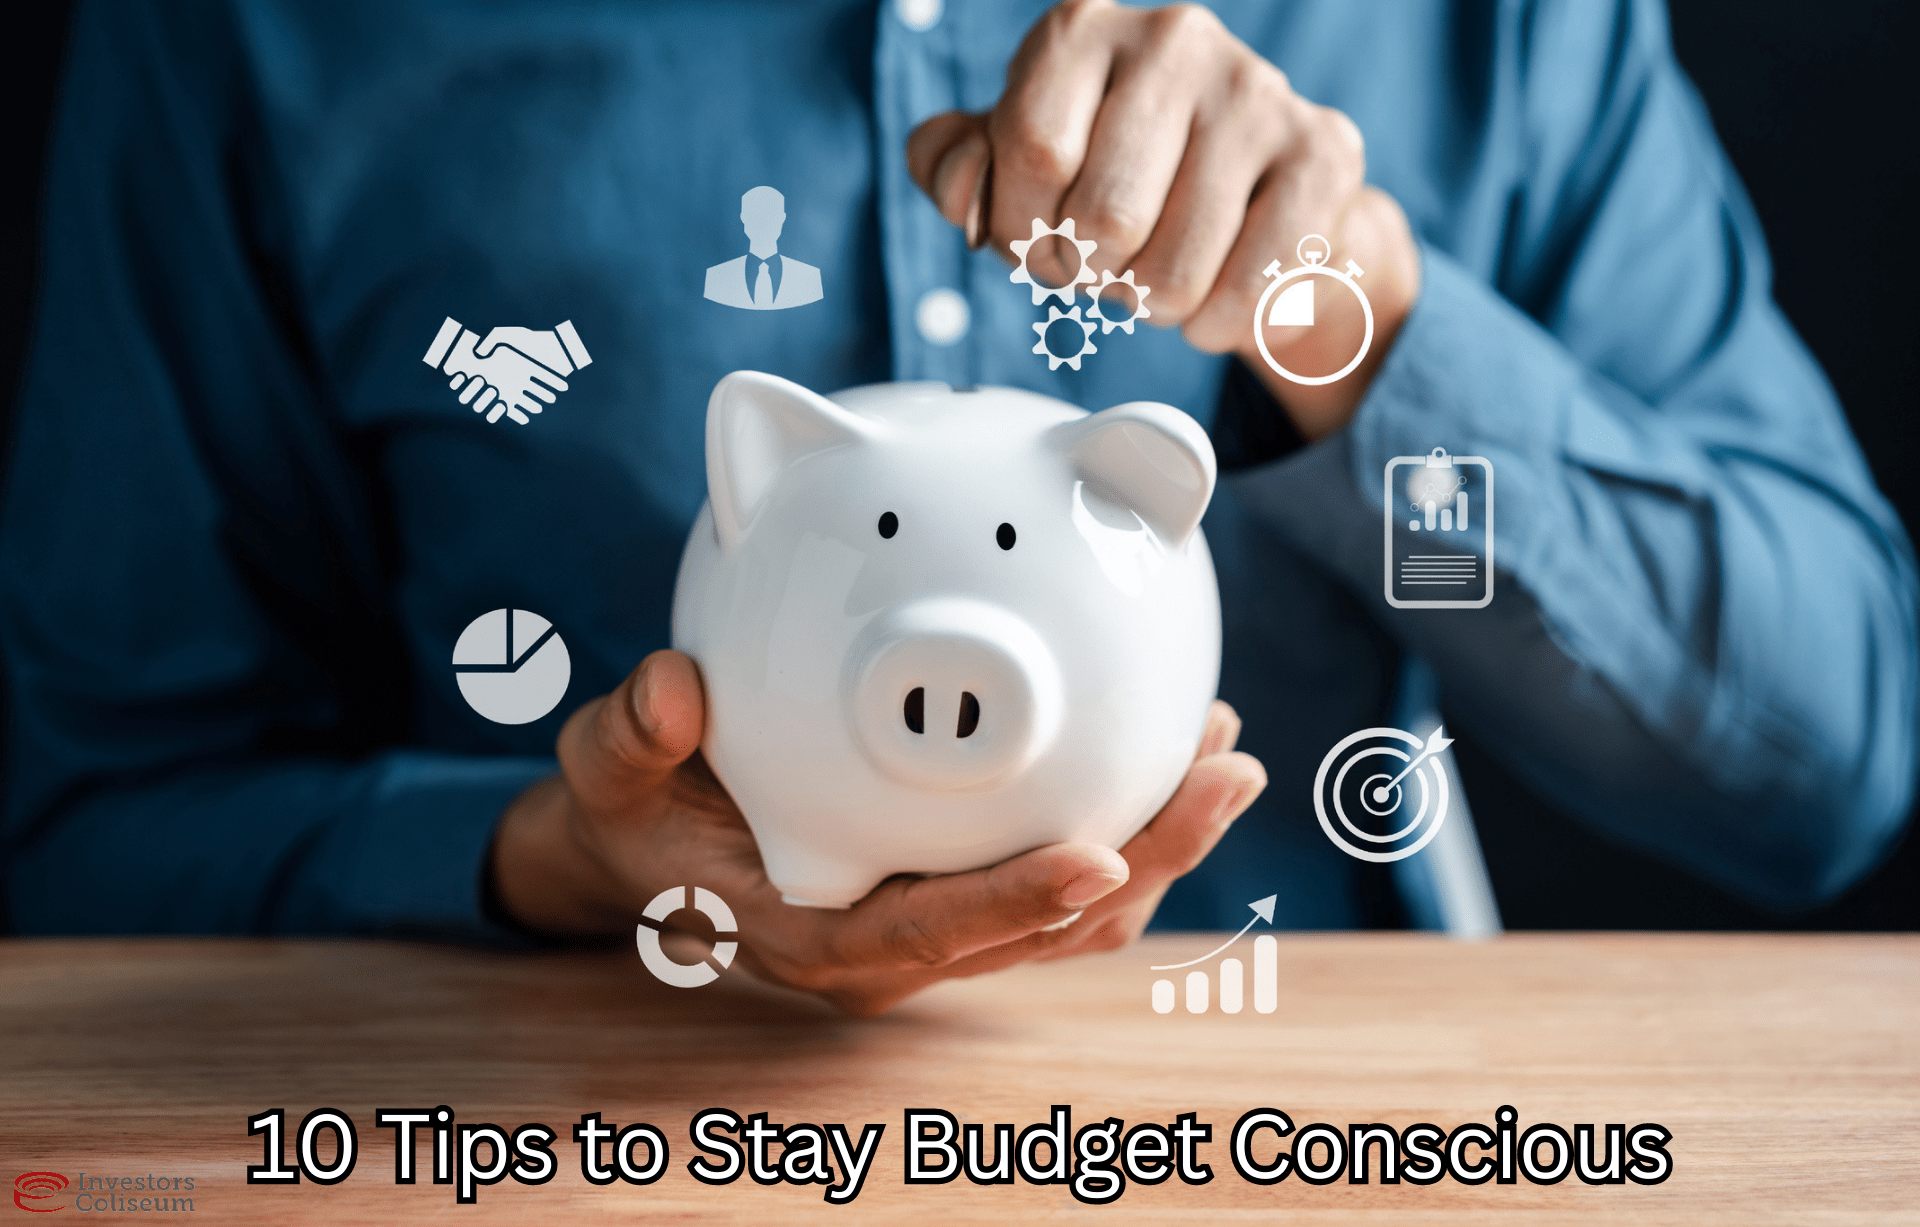 10 Tips to Stay Budget Conscious